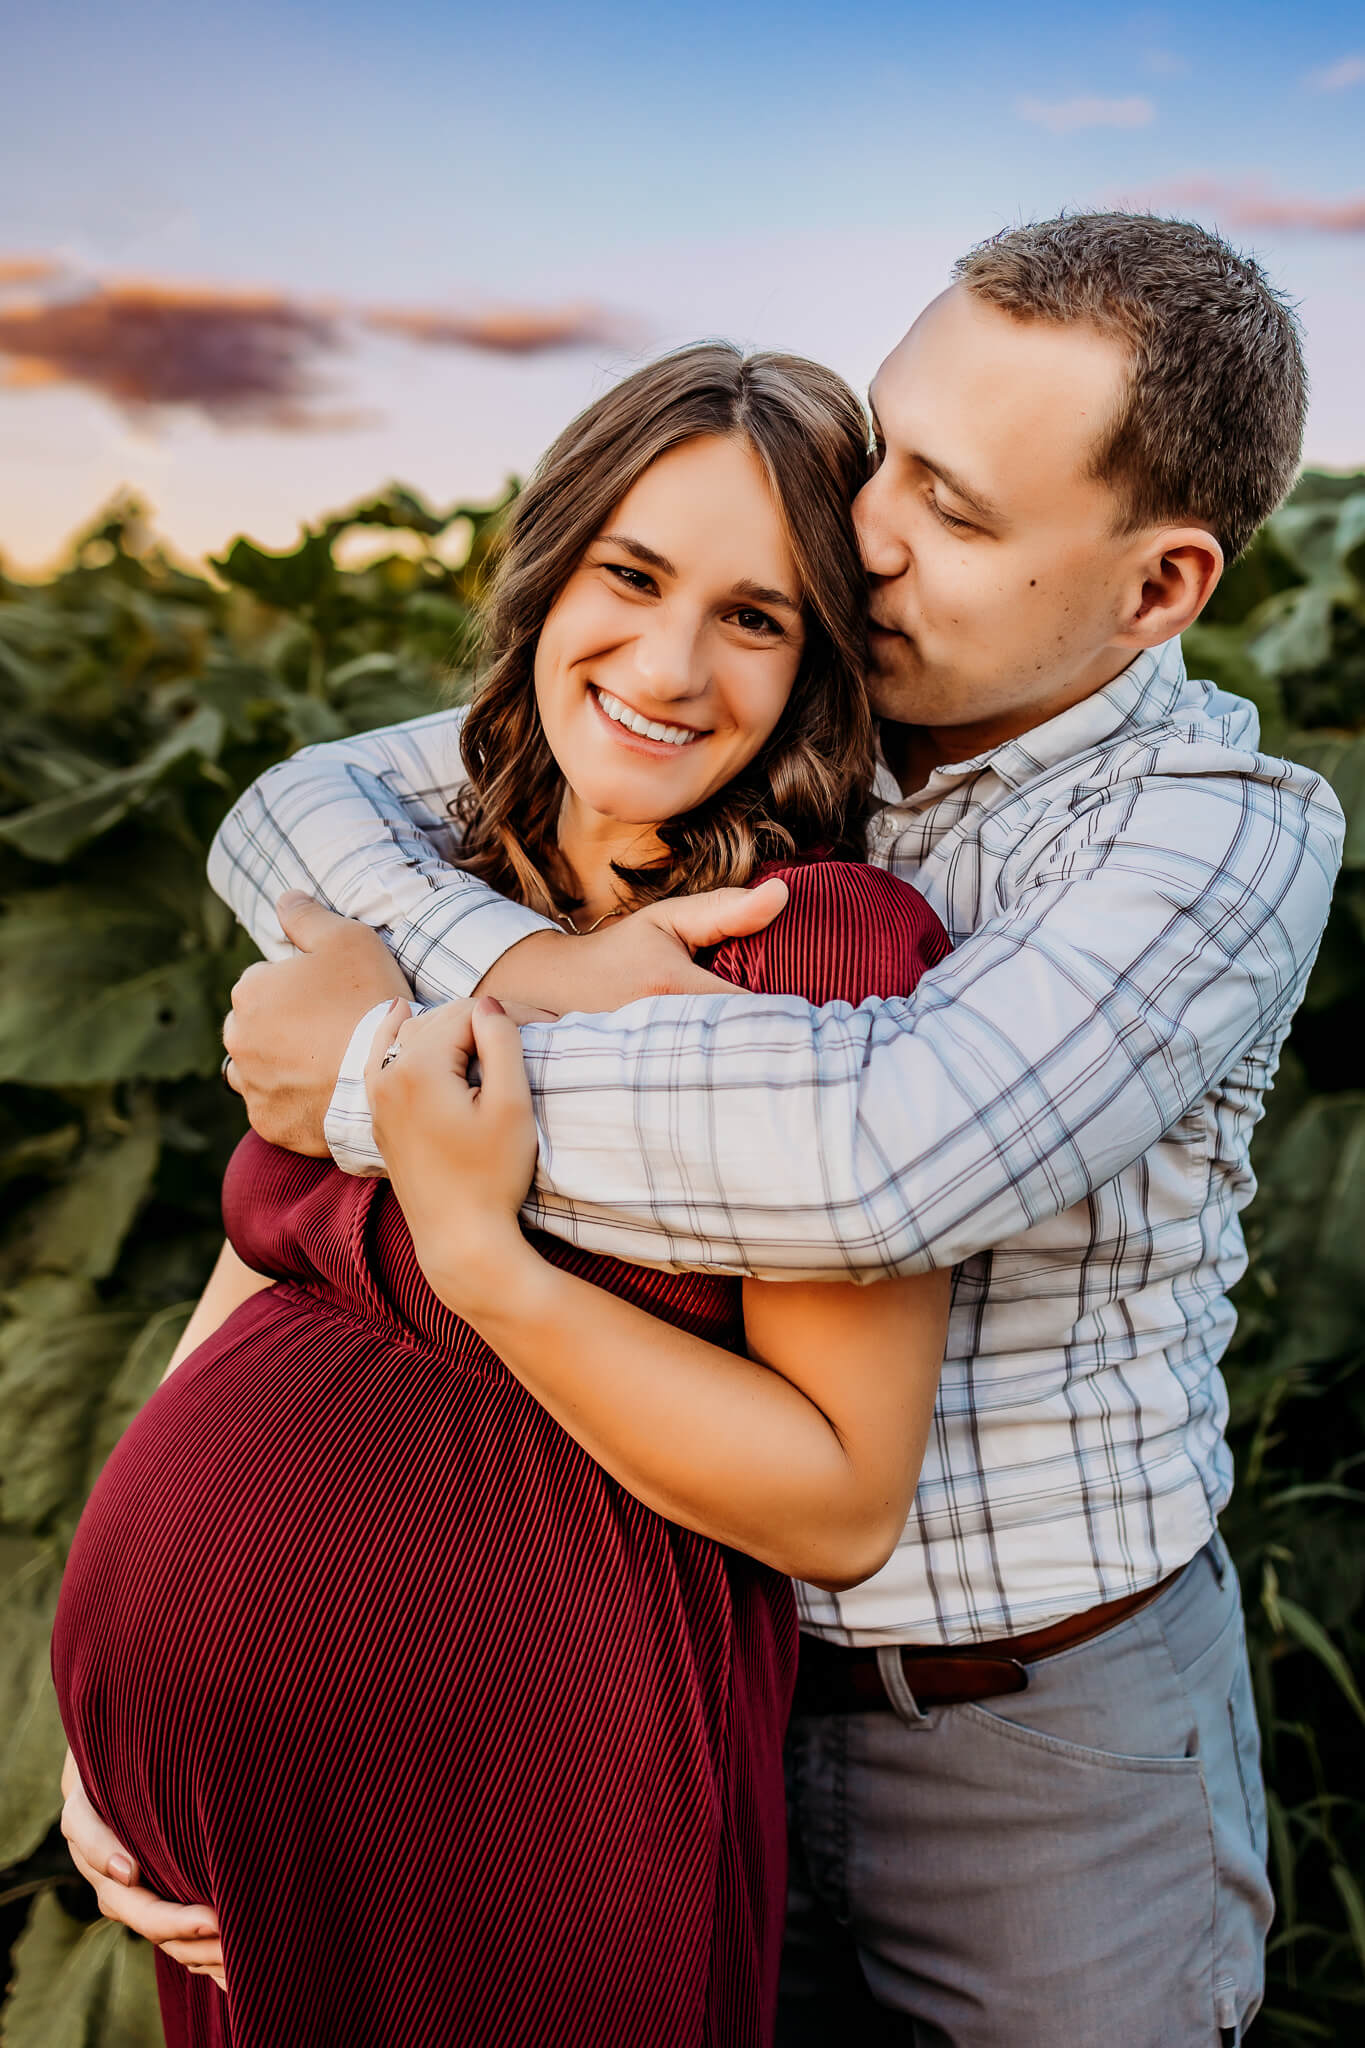 A mother to be in a red maternity dress is hugged and kissed by her husband while standing outside at sunset after visiting baby shower venues eau claire